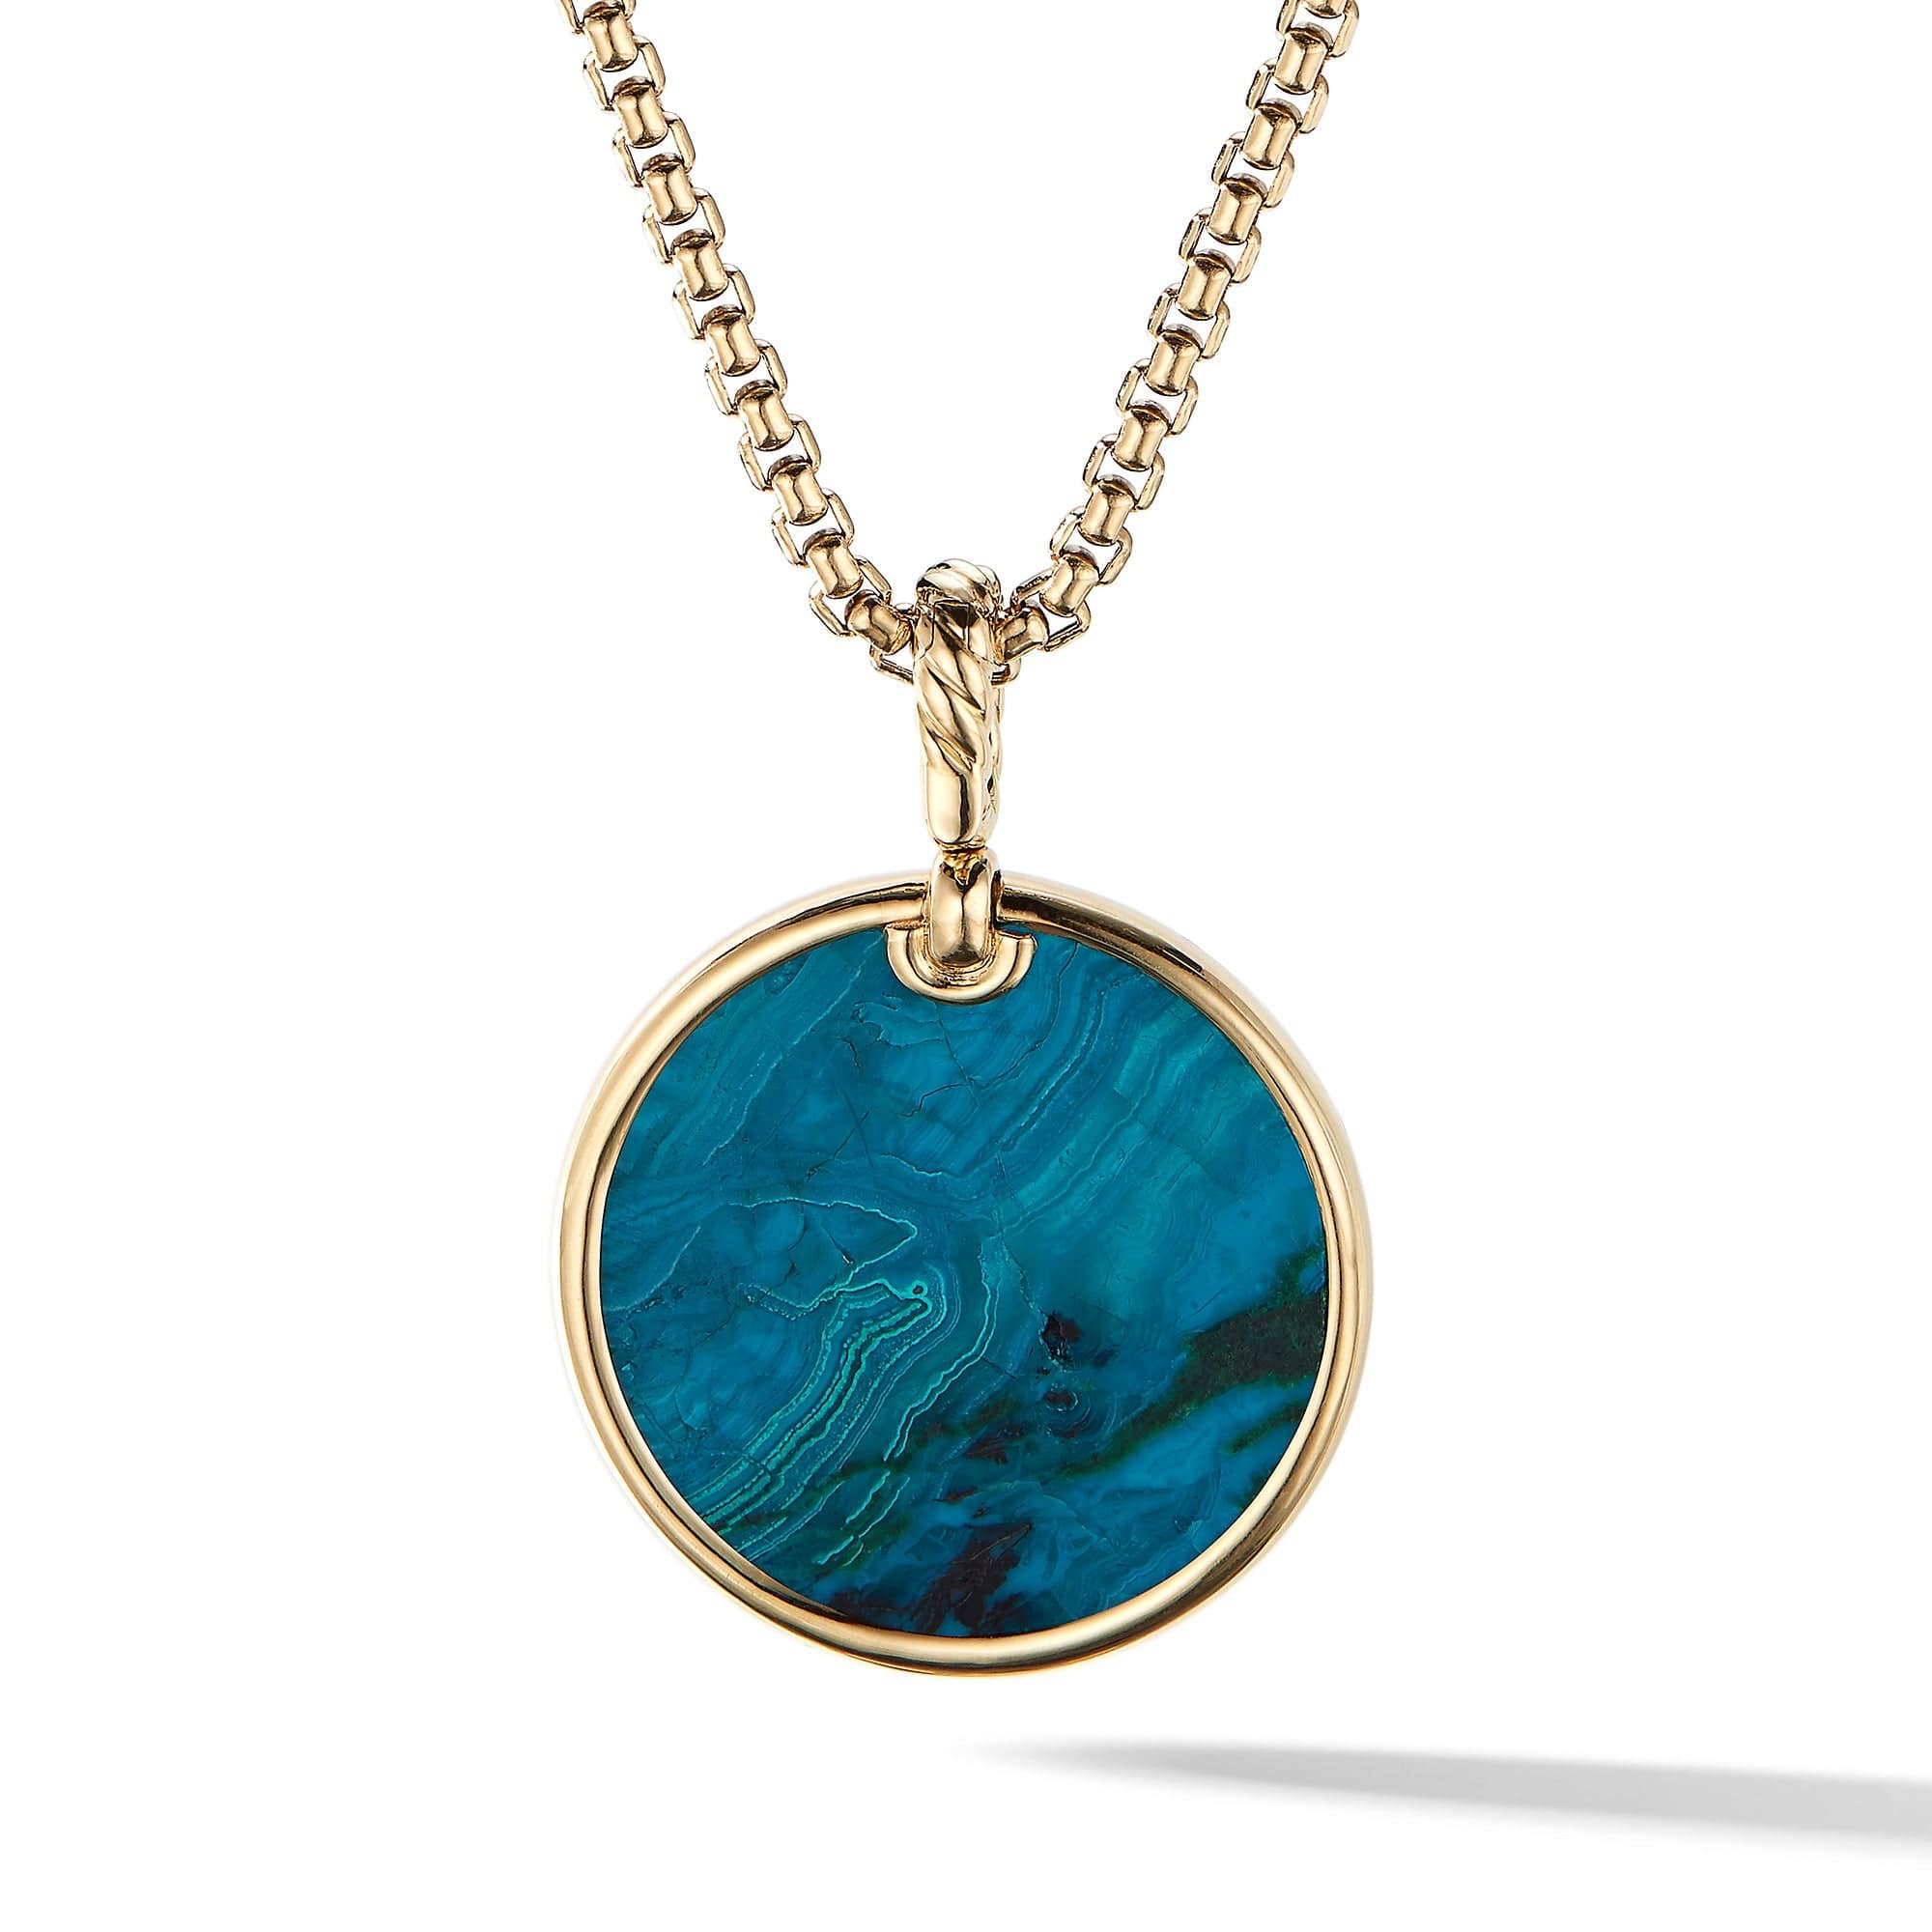 DY Elements Artist Series Disc Pendant in 18K Yellow Gold with Chrysocolla and Pavé Diamonds